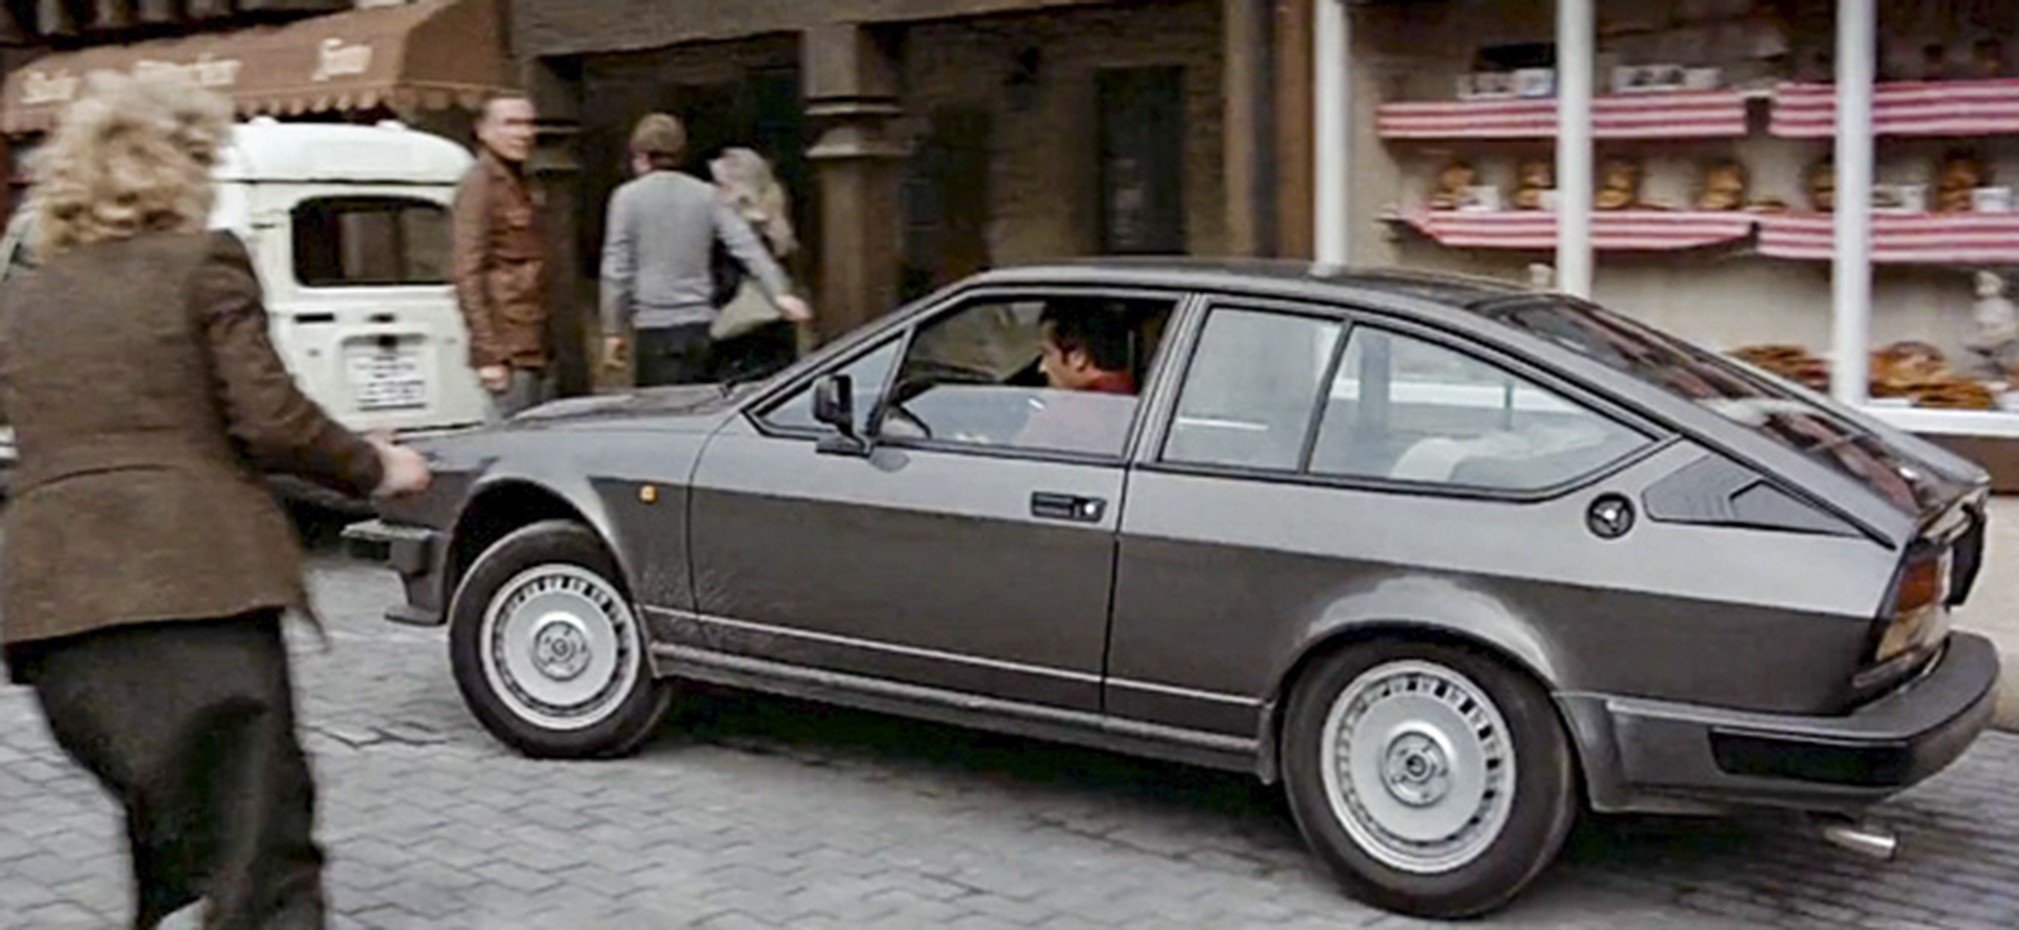 In Octopussy Moore drove an Alfa Romeo GTV6, designed by Giorgetto Giugiaro, who also drew up the Lotus Esprit. Petrolicious.com describes the GTV6 as “pornography for engineers”. Photo: Youtube